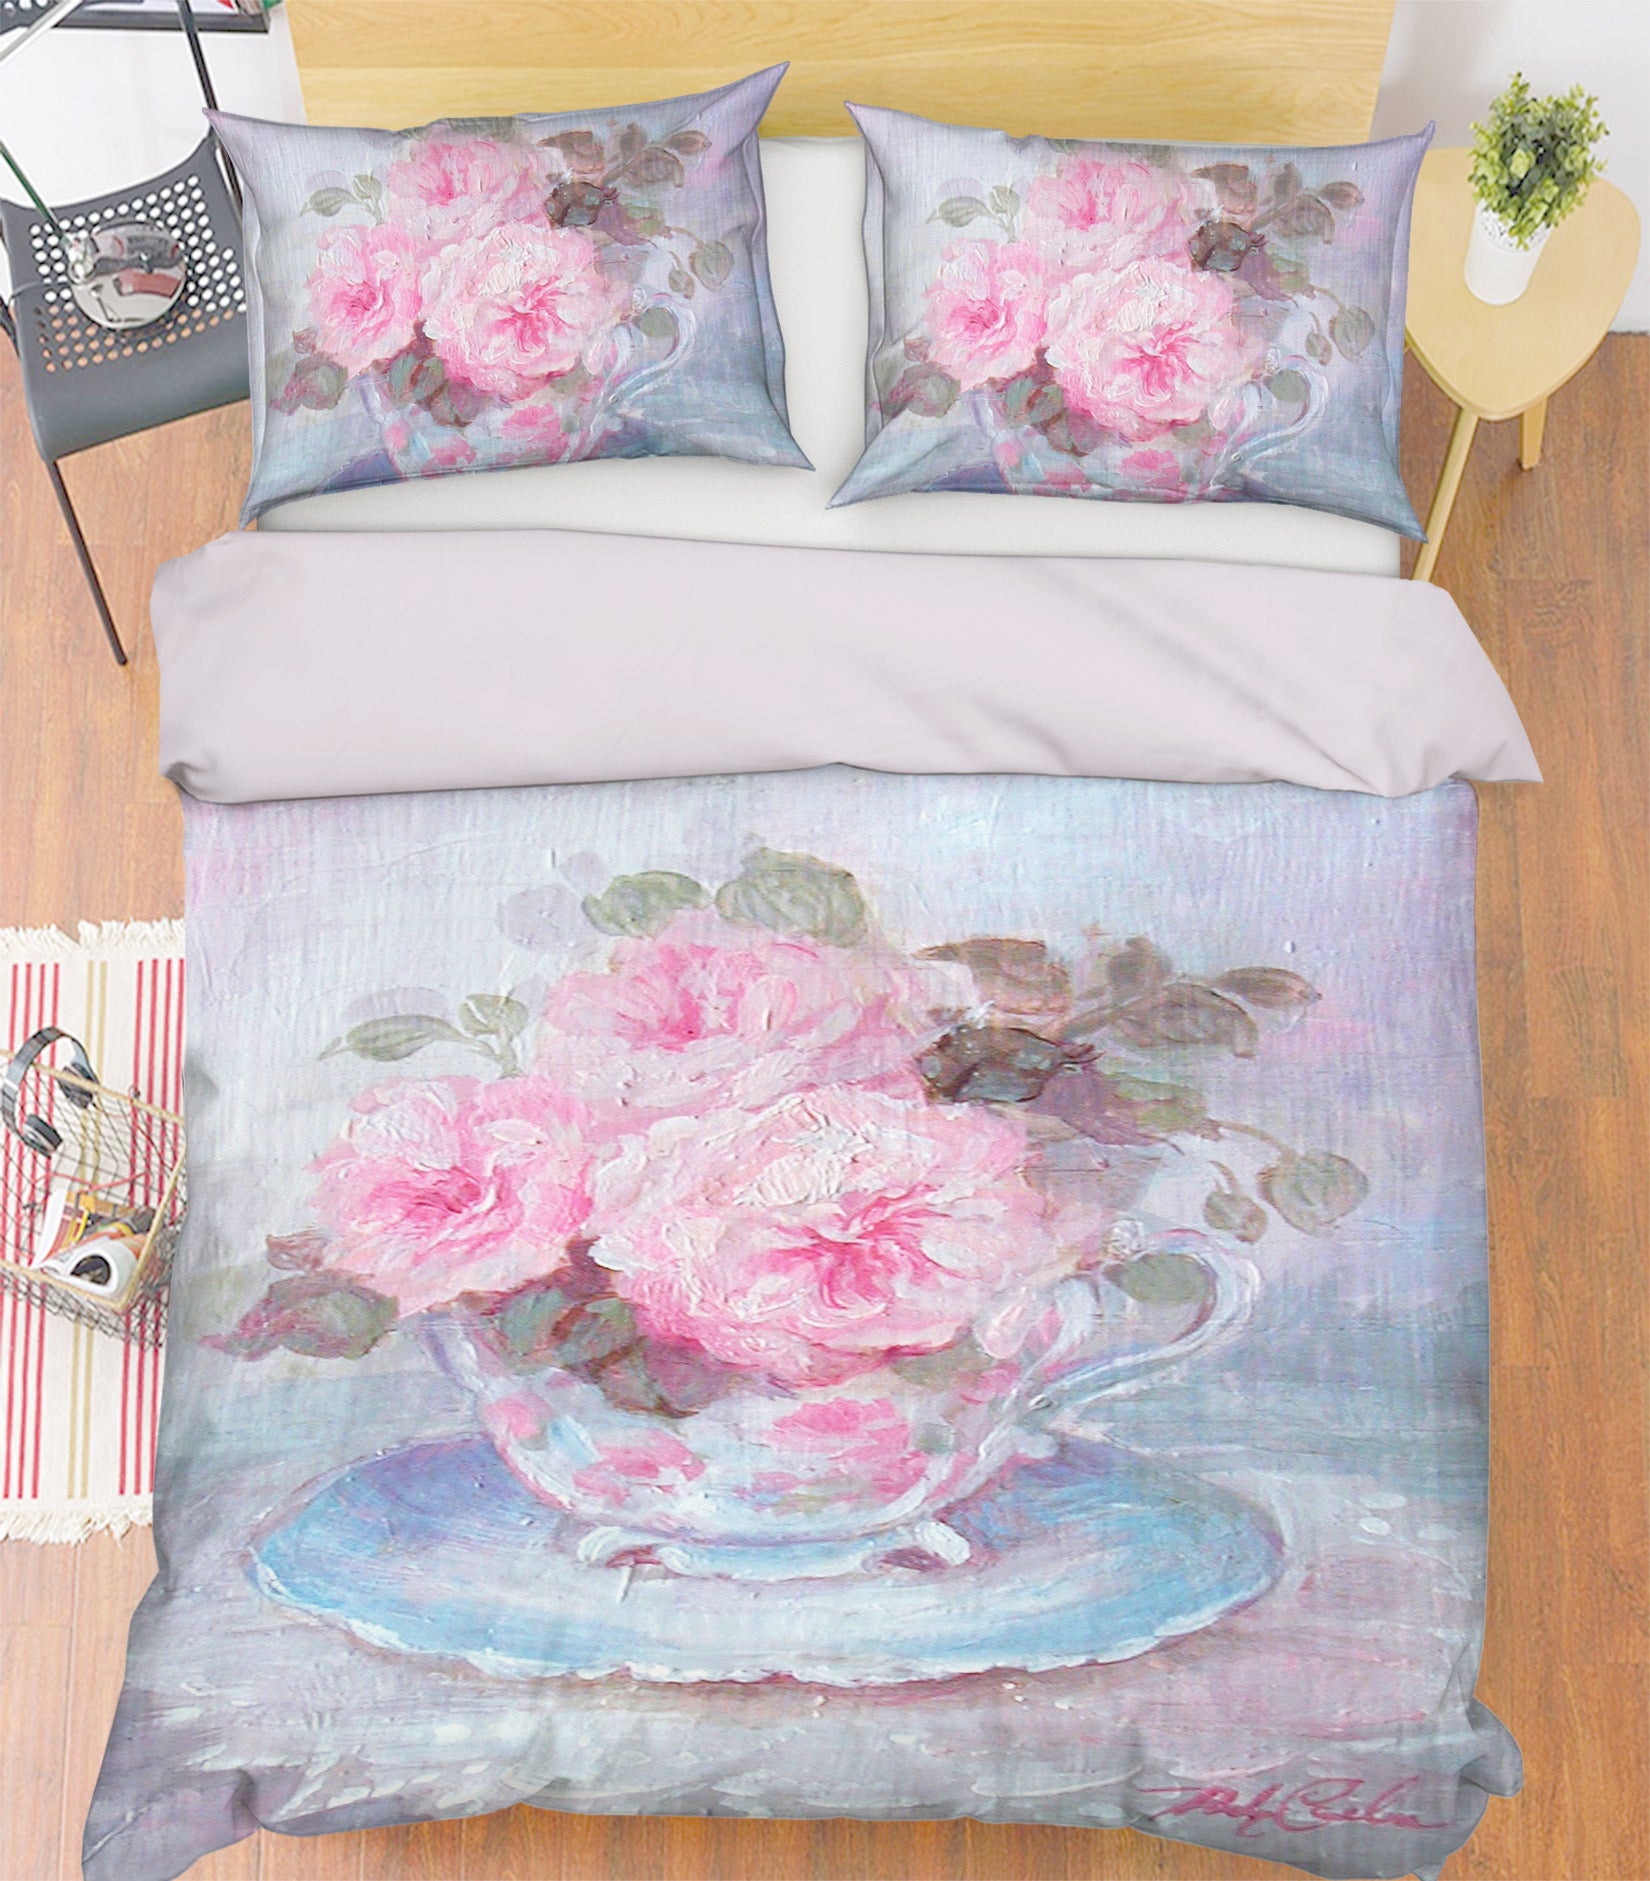 3D Pink Vase 2156 Debi Coules Bedding Bed Pillowcases Quilt